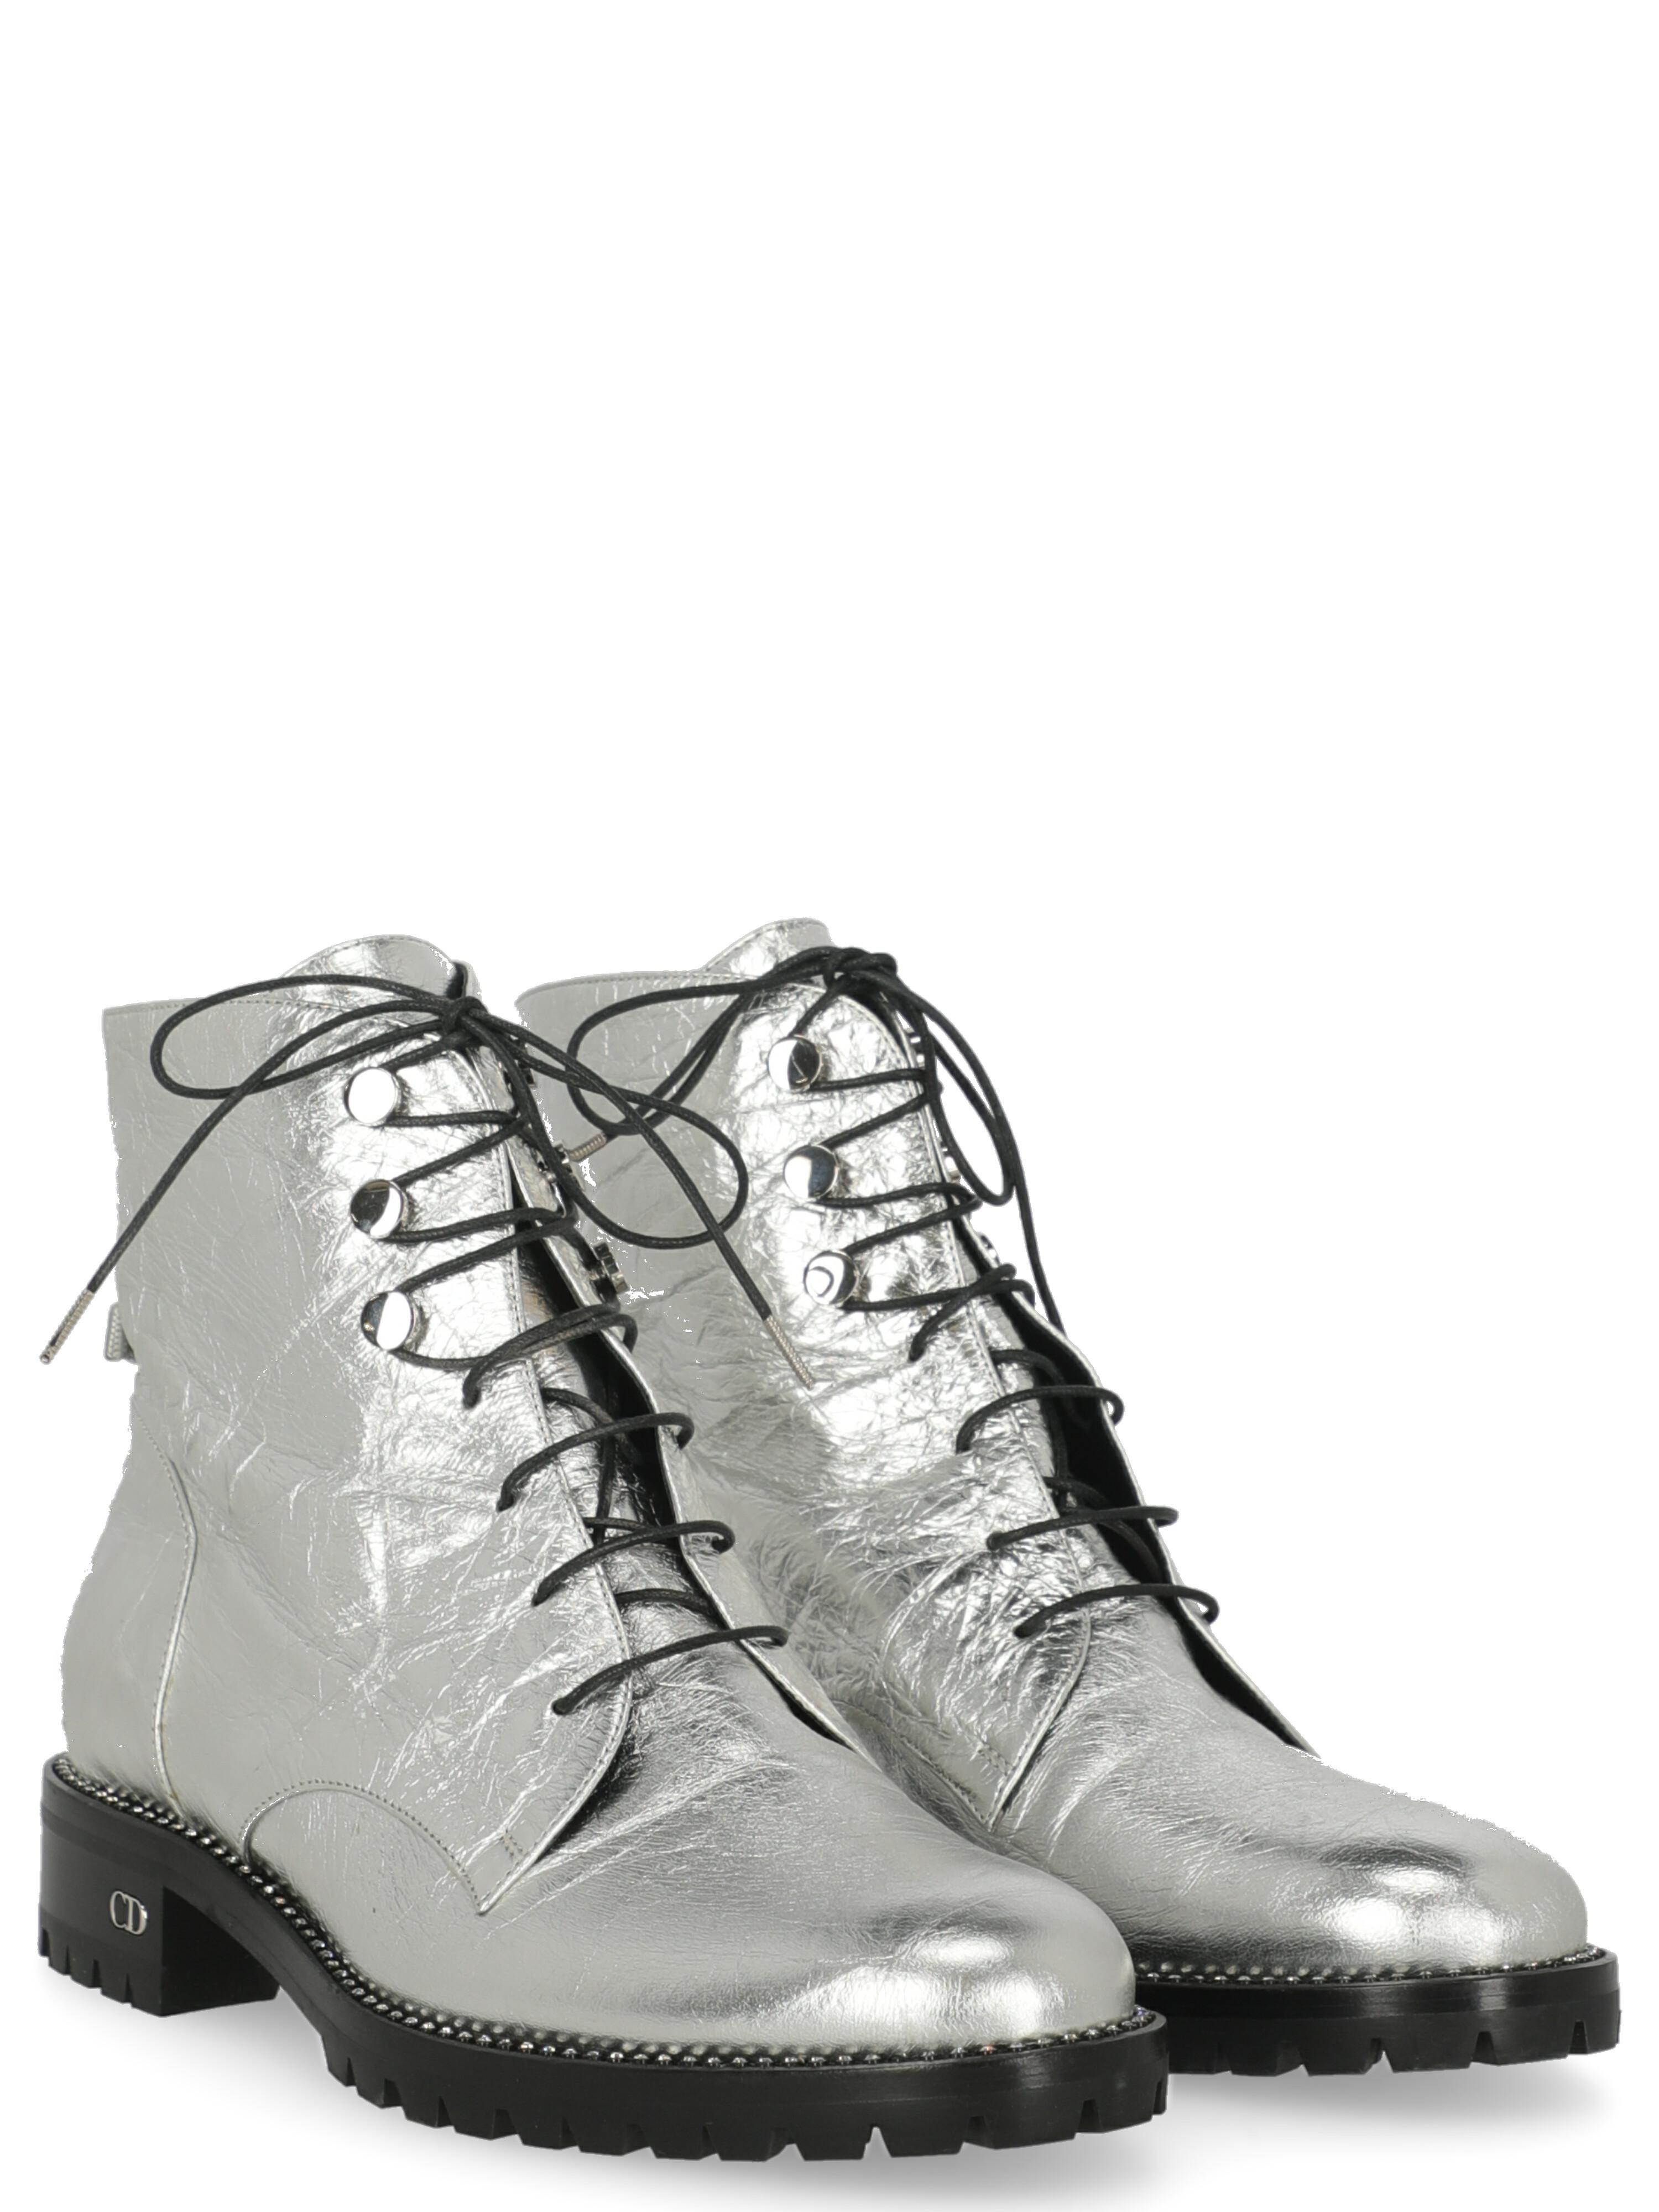 Ankle boots, leather, solid color, metallic effect, side logo, lace-up, silver-tone hardware, round toe, leather insole, block heel, low and flat heel

Includes: N\A 

Product Condition: Excellent

Measurements:
Height: 3 cm	

Composition:
Upper